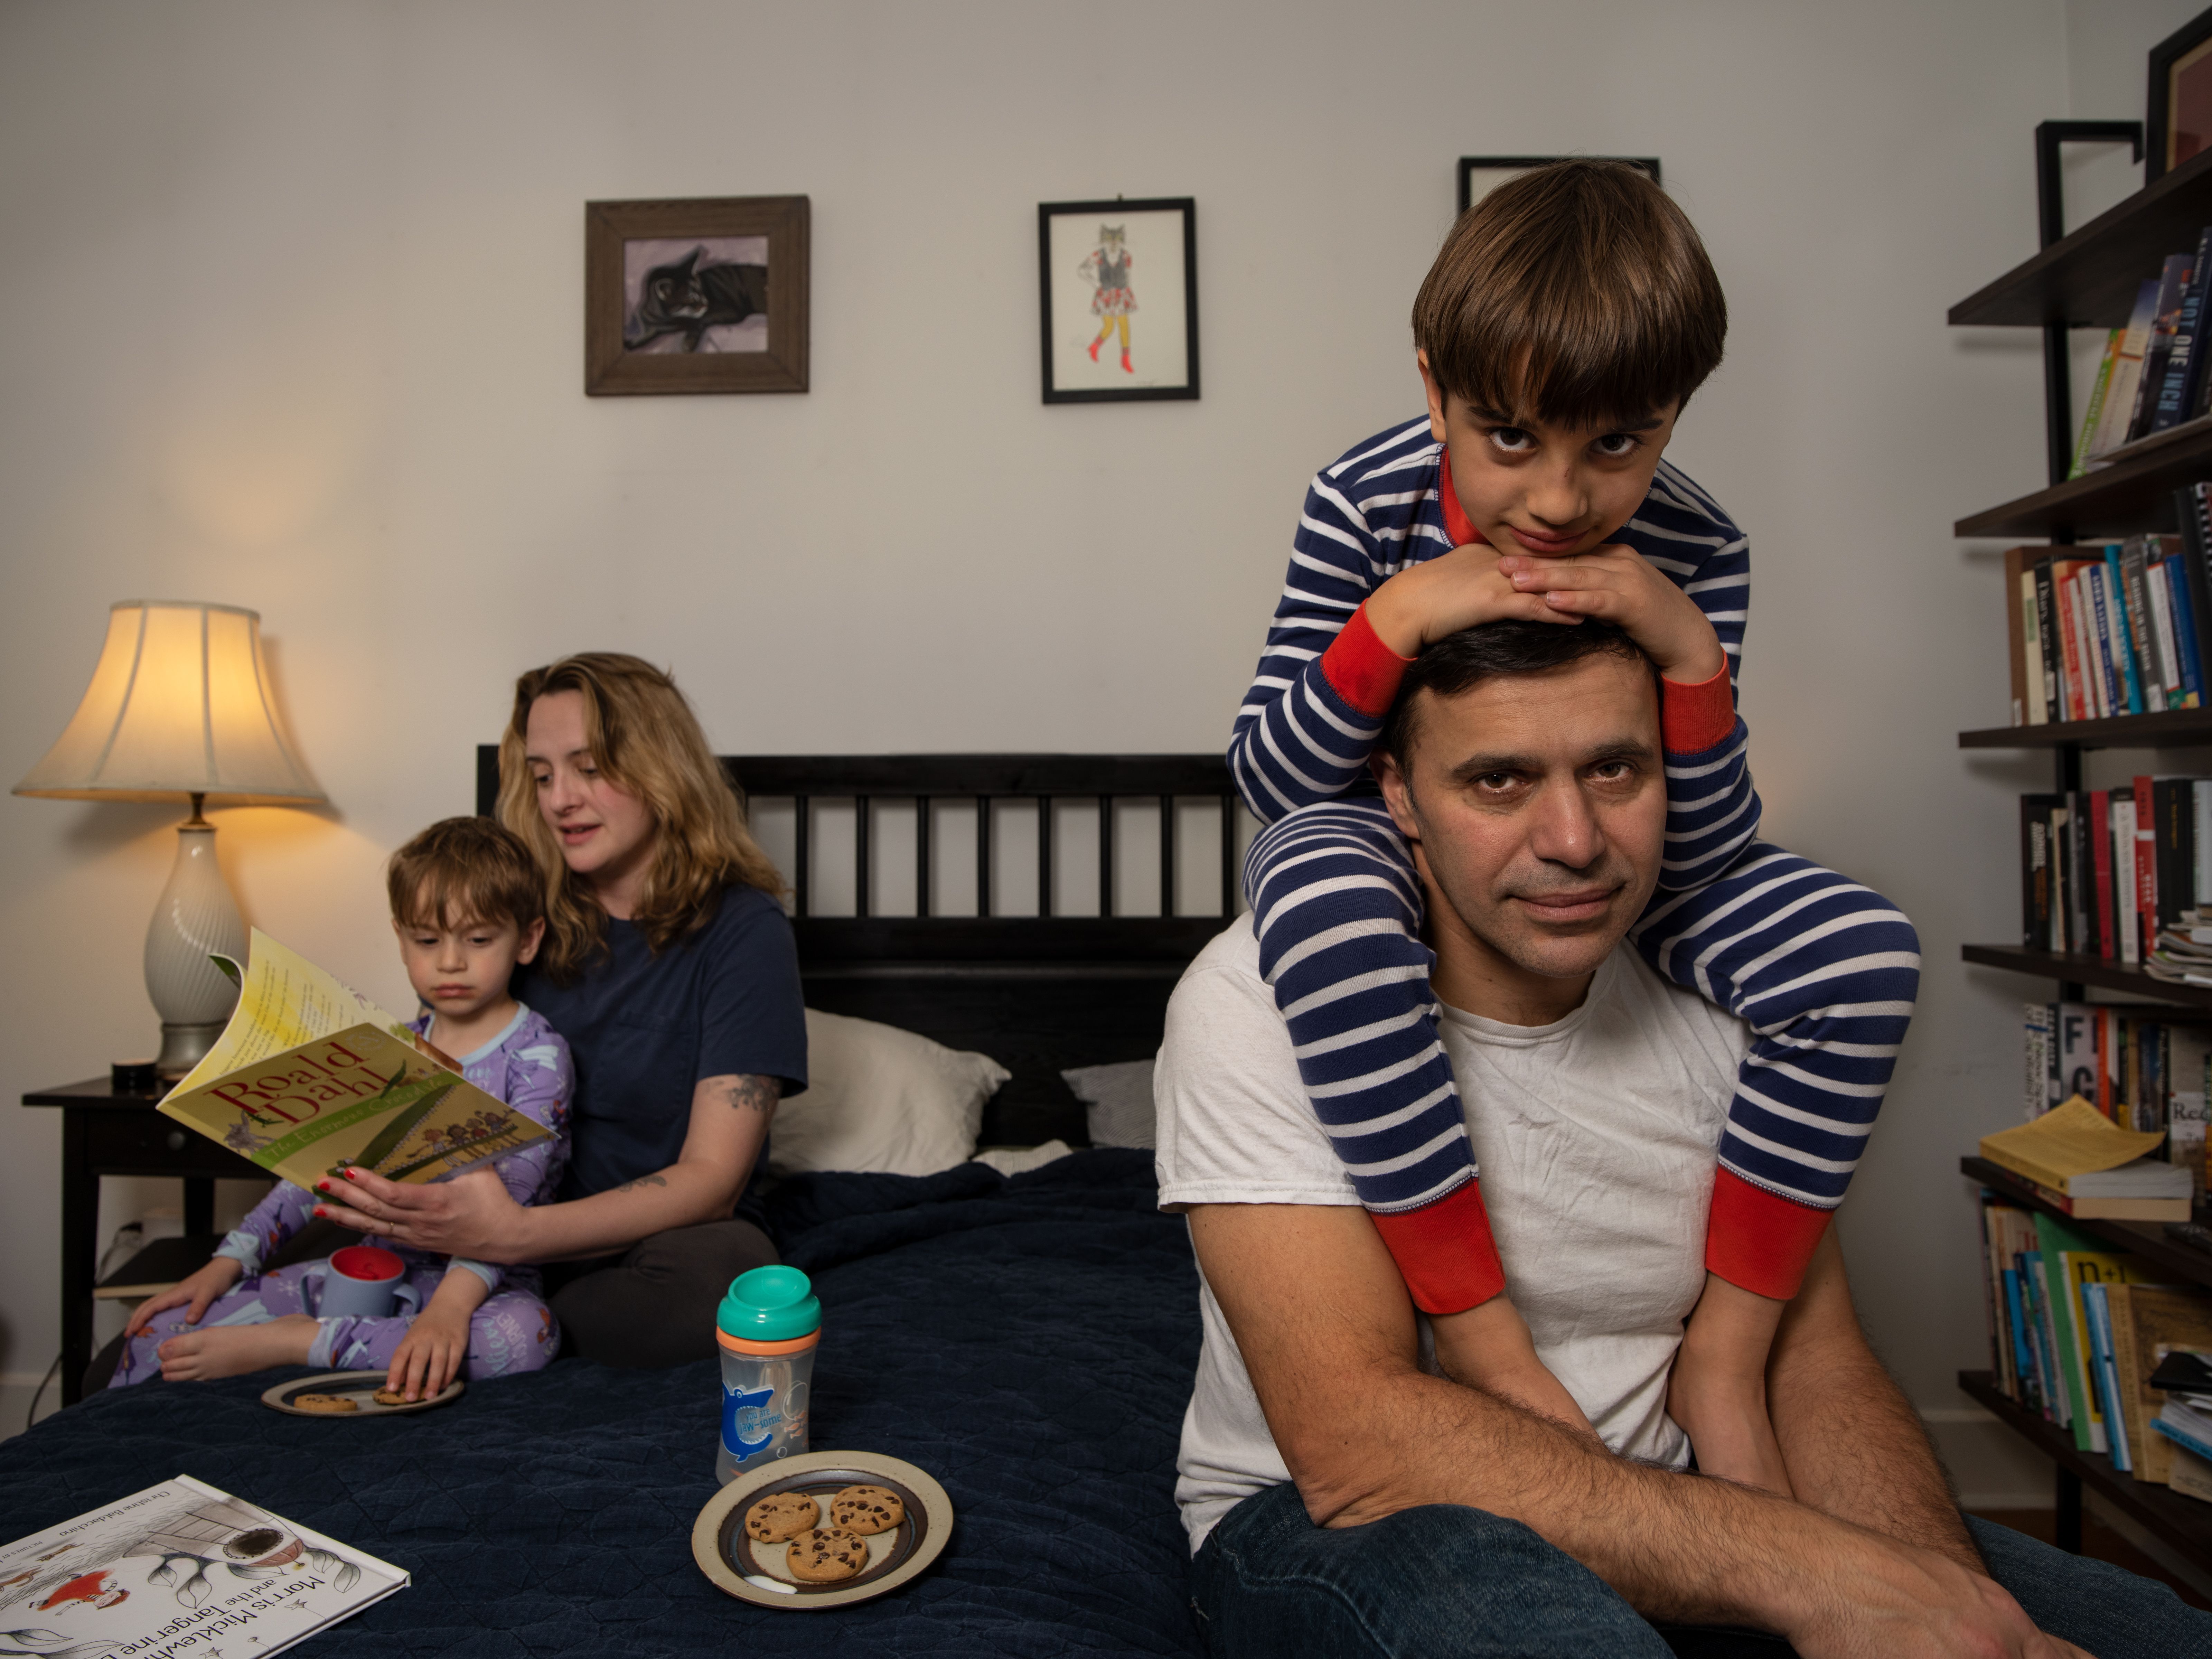 Keith Gessen and Emily Gould on Writing Books and Children pic